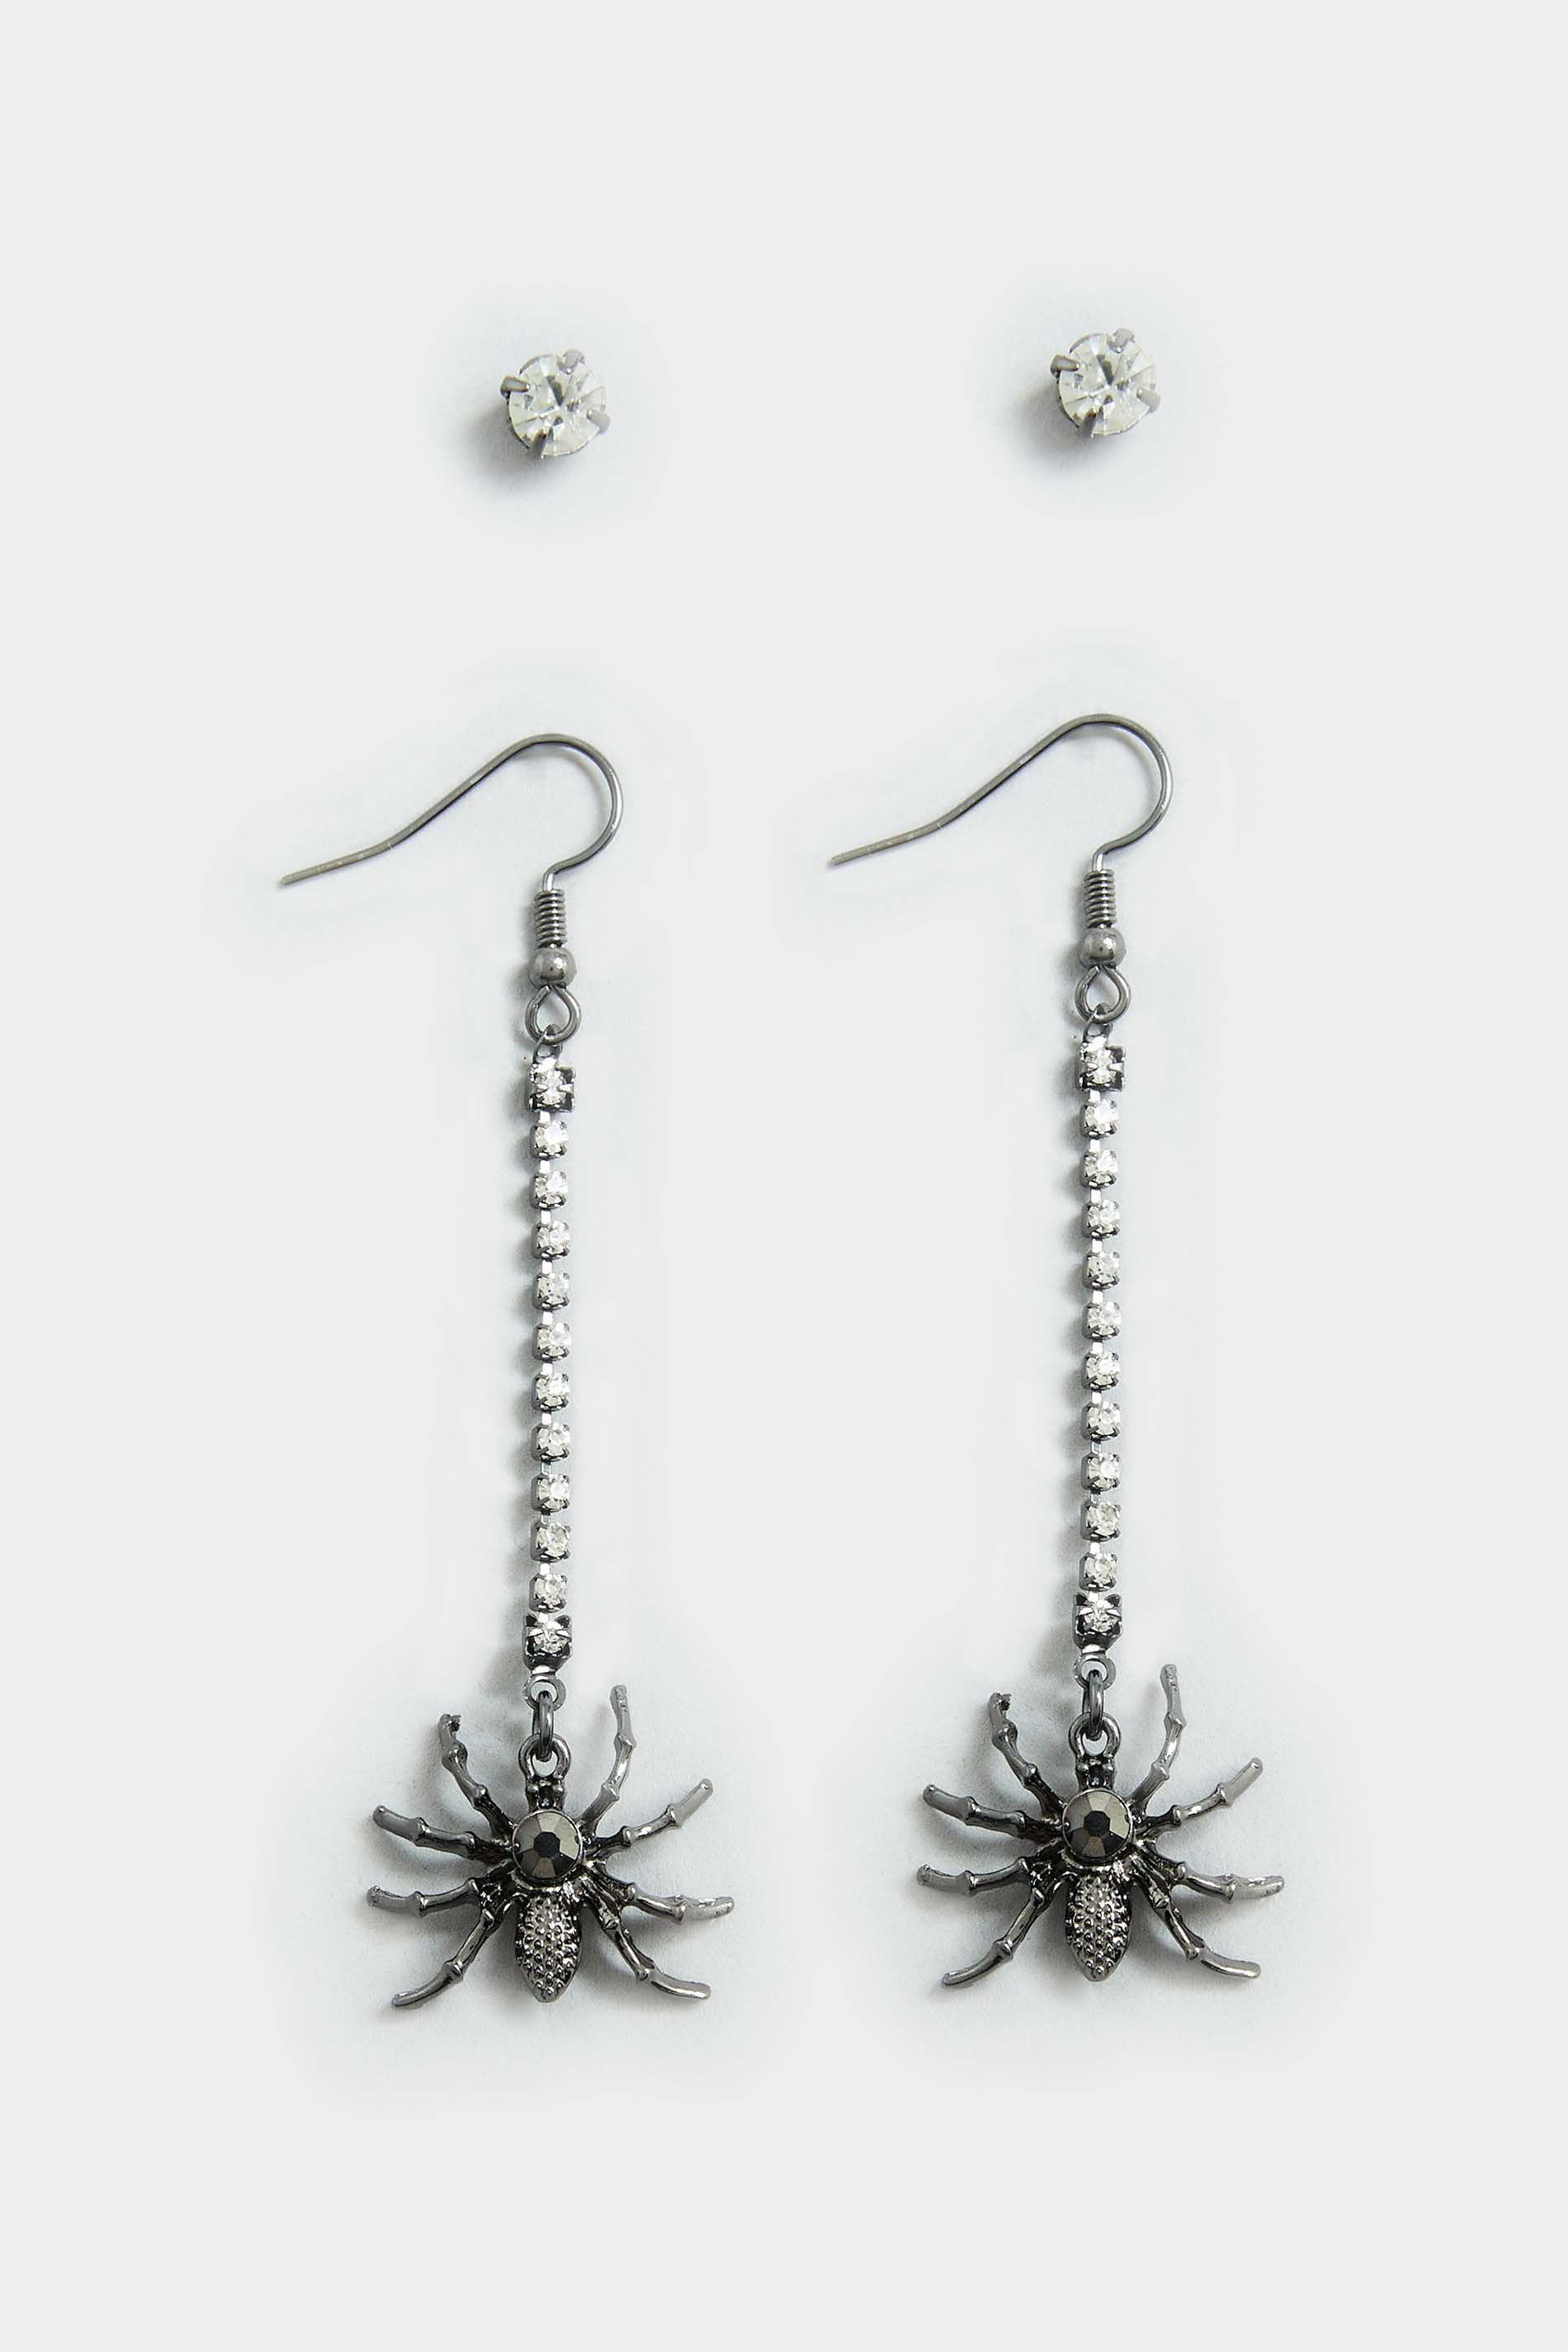 2 PACK Silver Spider Earrings Set | Yours Clothing 2